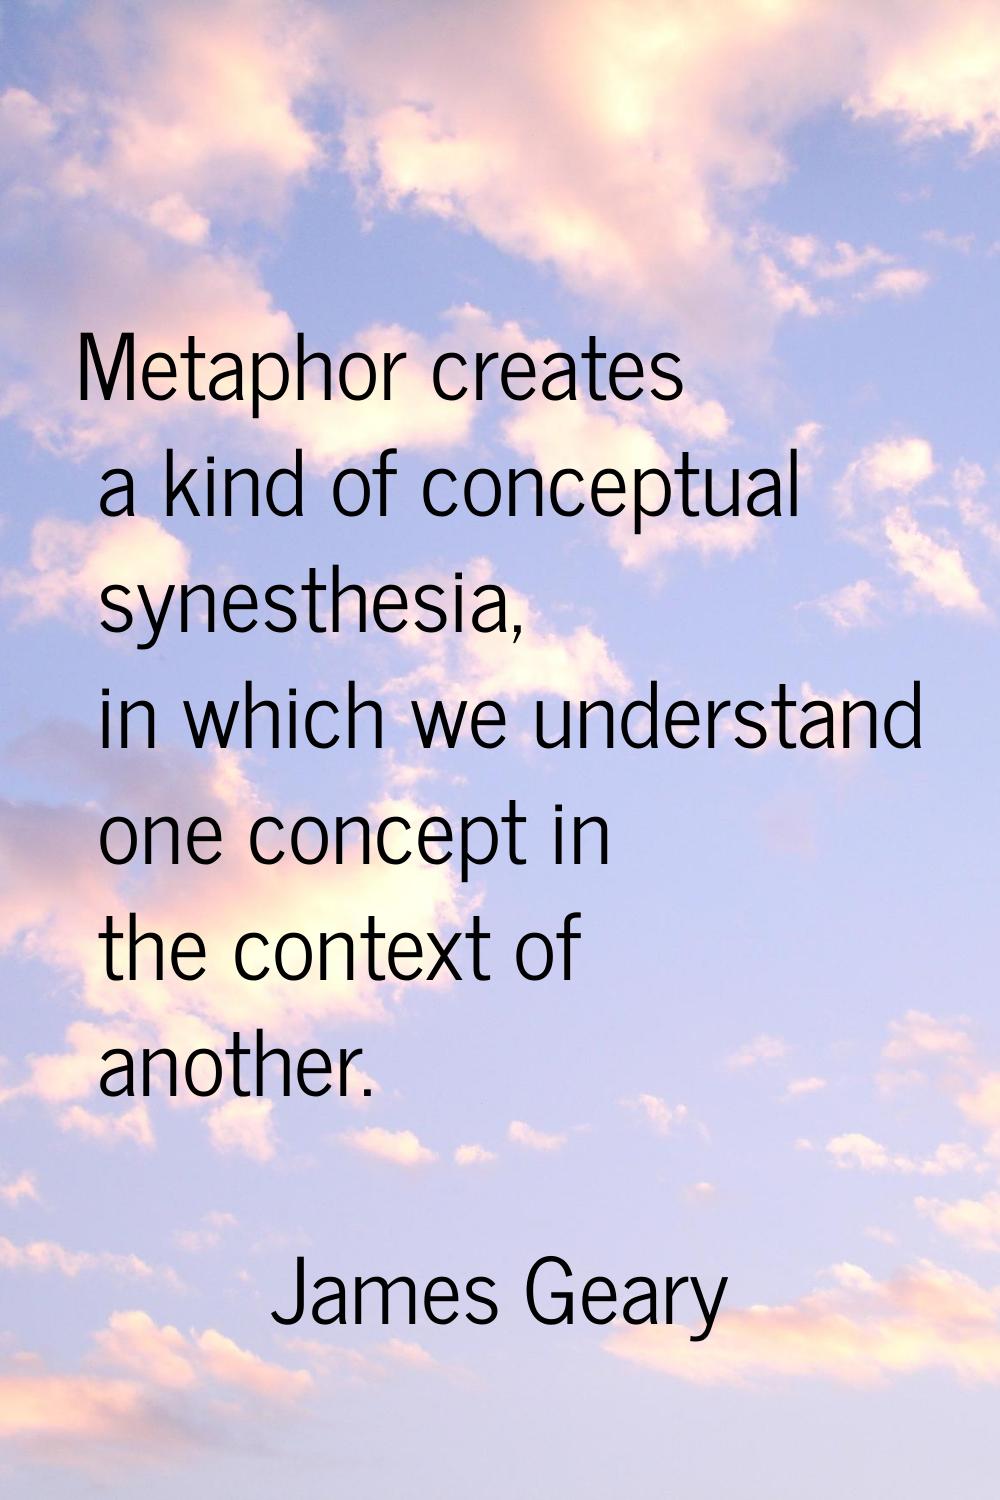 Metaphor creates a kind of conceptual synesthesia, in which we understand one concept in the contex